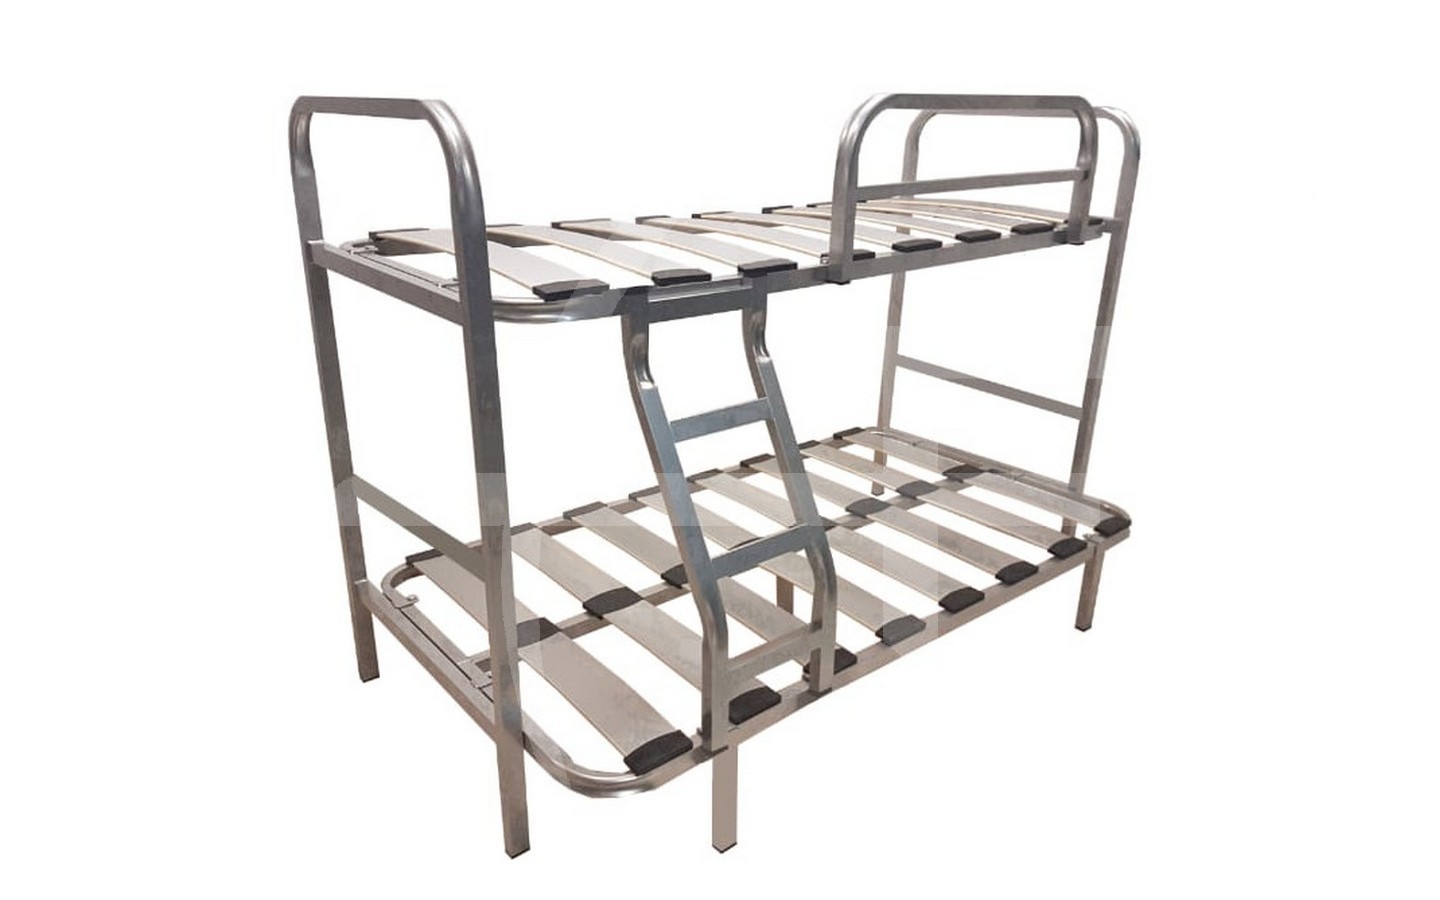 Bunk Beds For S Steel, Used Metal Bunk Beds